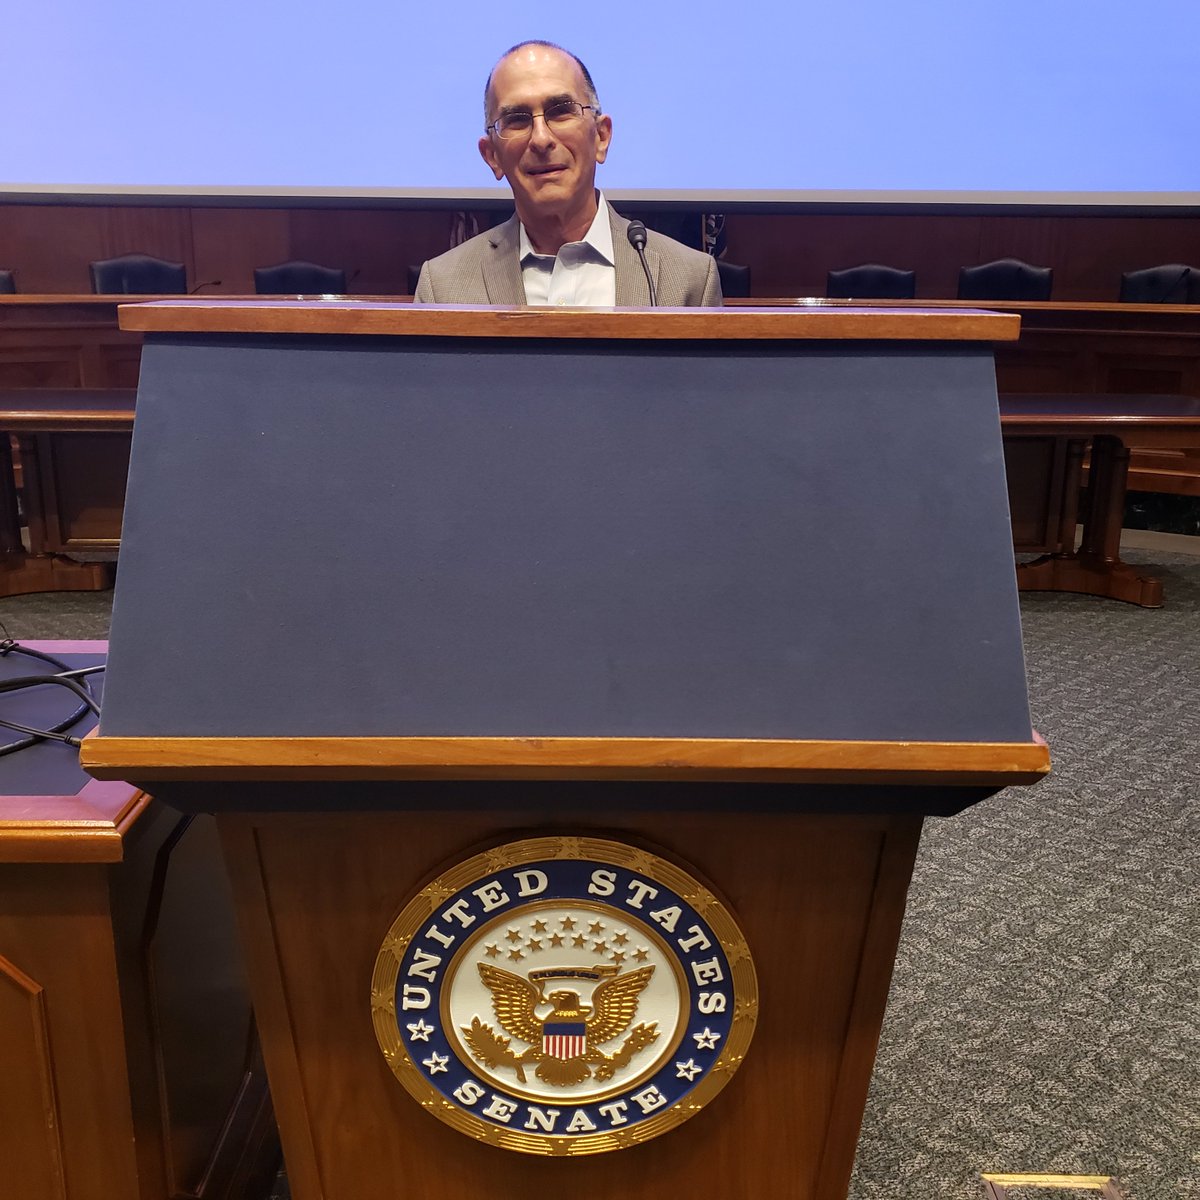 Daniel Nagin, @HeinzCollege professor and criminologist, prepares for this morning&#39;s D.C. congressional briefing on addressing incidents of mass gun violence in the U.S., presented by Heinz College, @HFGuggenheim, and @cebcp: #massviolenceresearch #IntelligentAction